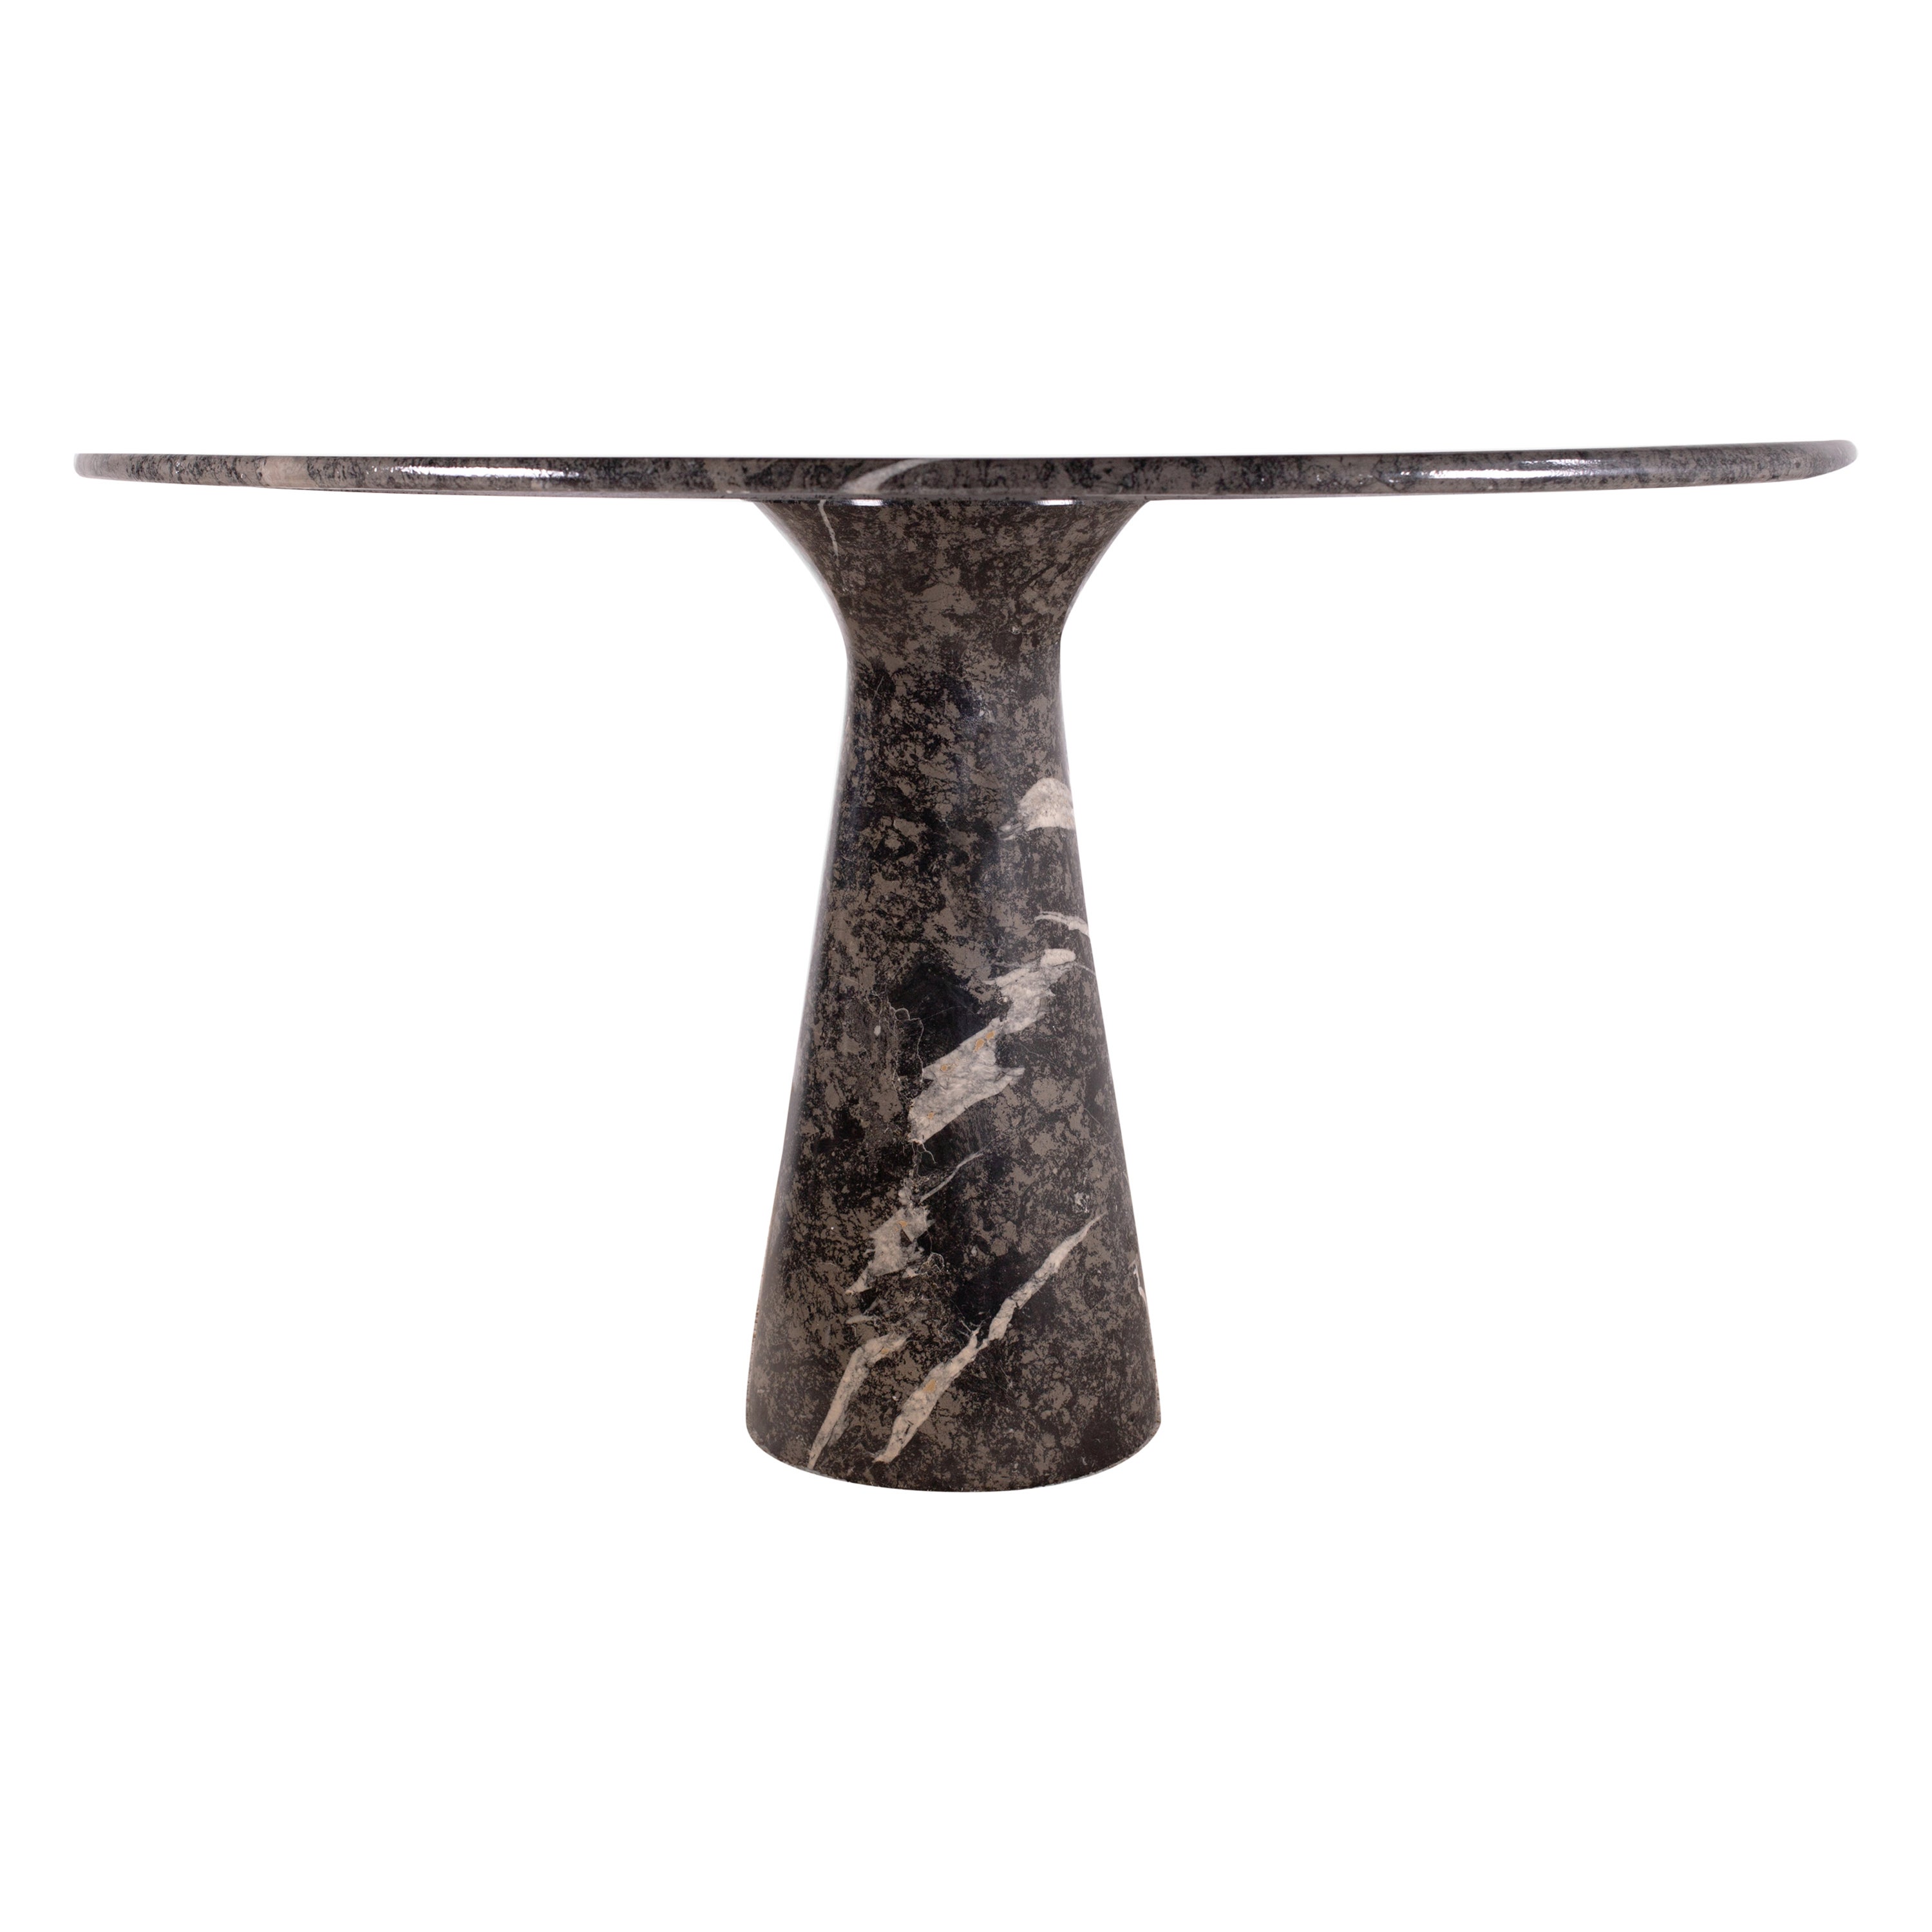 1970s Angelo Mangiarotti Dining Table in Fior Di Bosco Marble for Skipper, Italy For Sale